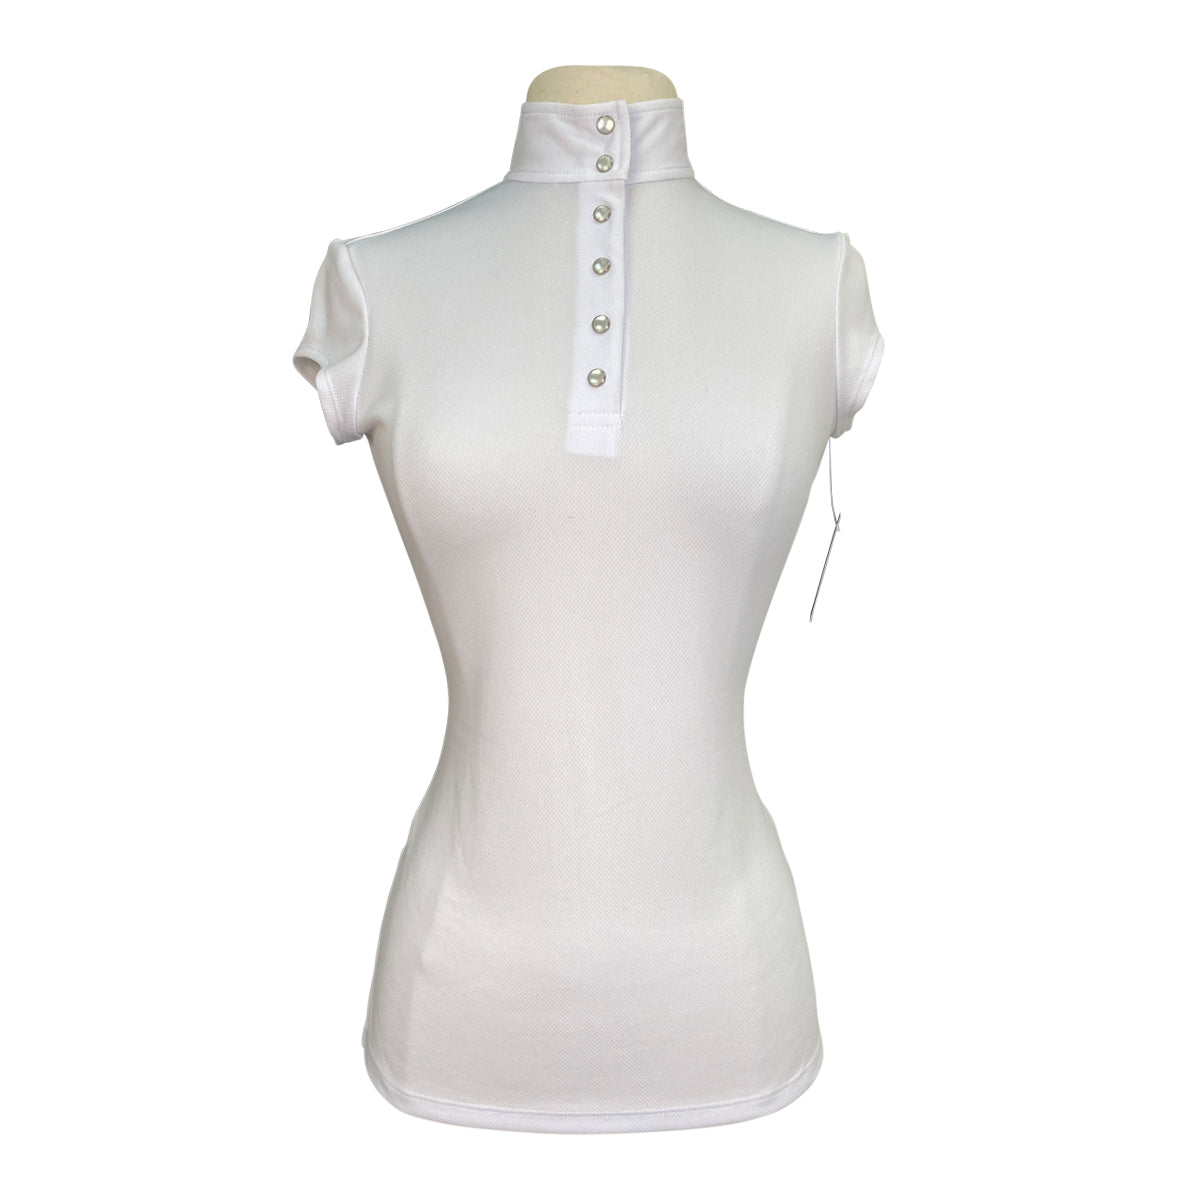 Éce Equestrian Cap Sleeve Competition Shirt in White/Purple Foxes